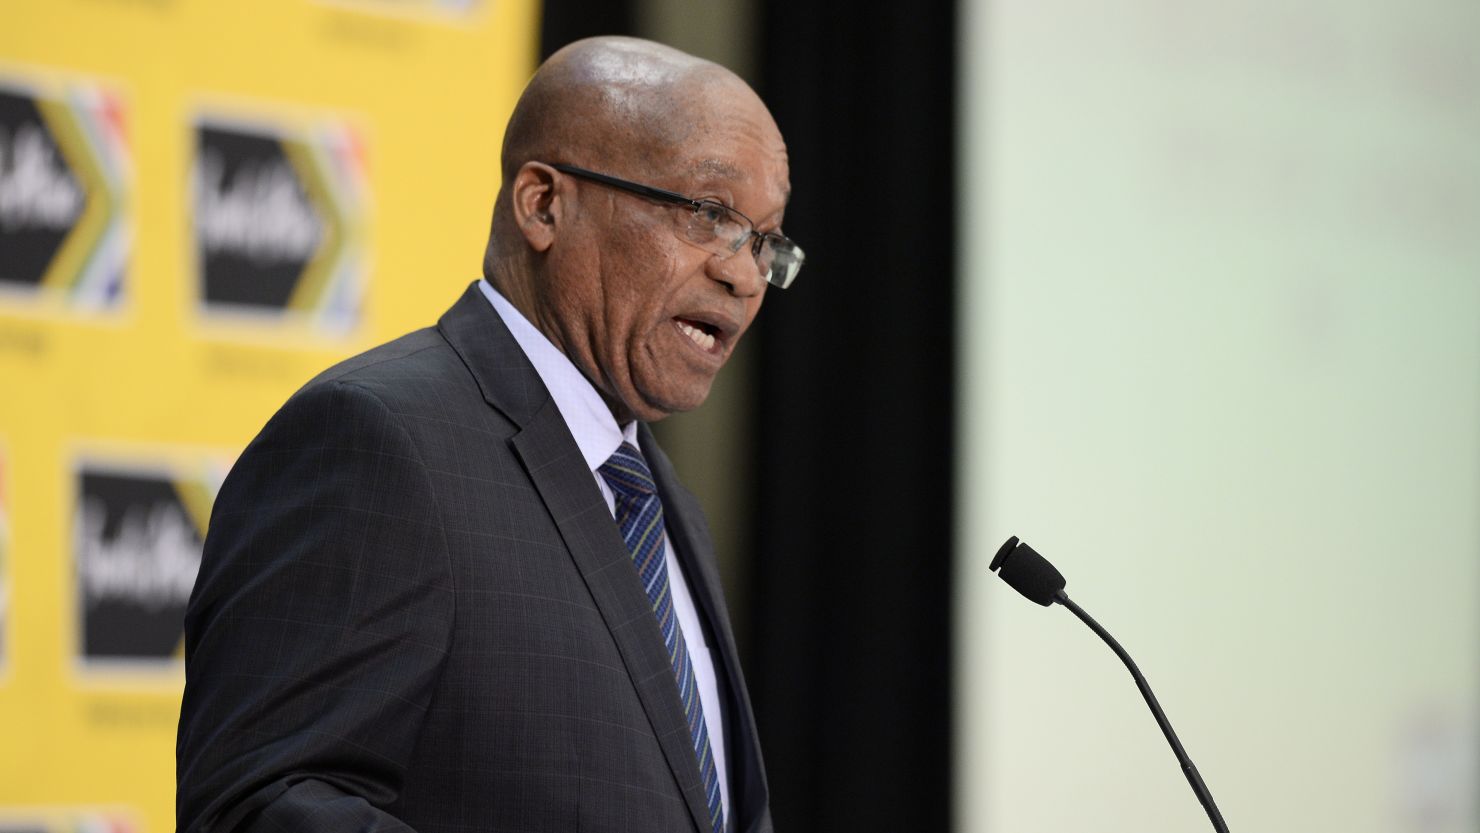 South African President Jacob Zuma in Johannesburg on October 14, 2013.